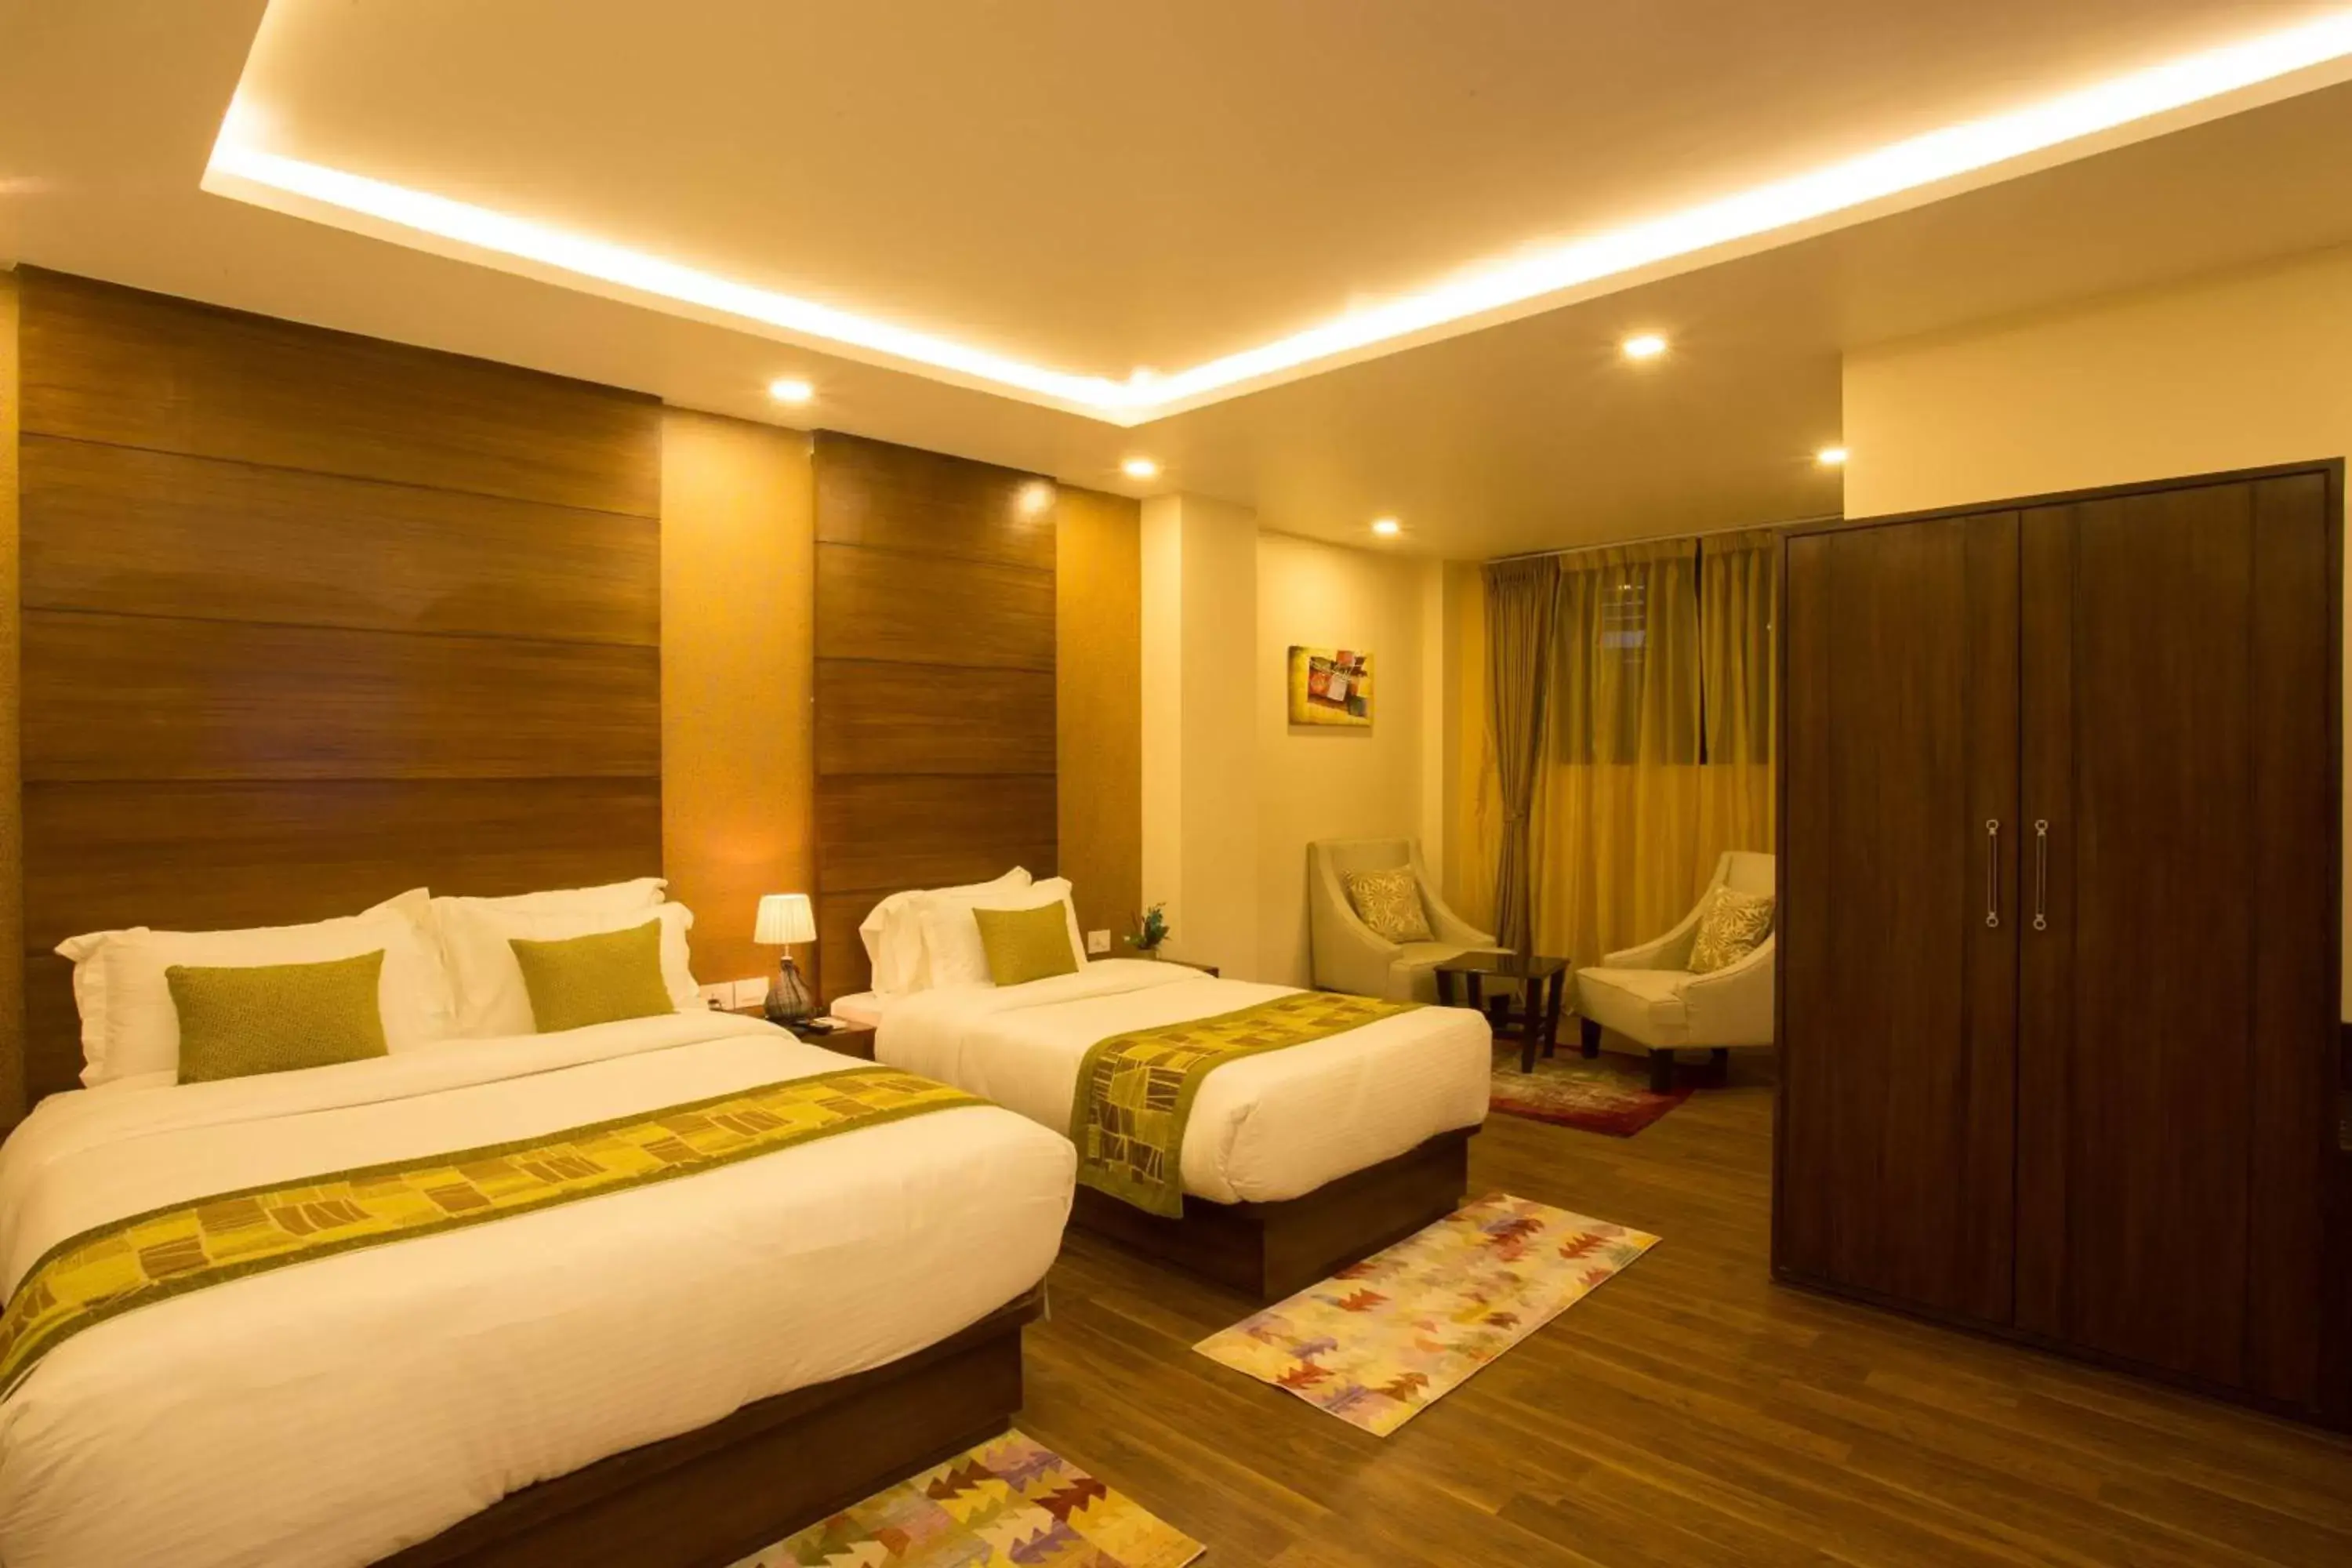 Bedroom, Room Photo in Yatri Suites and Spa